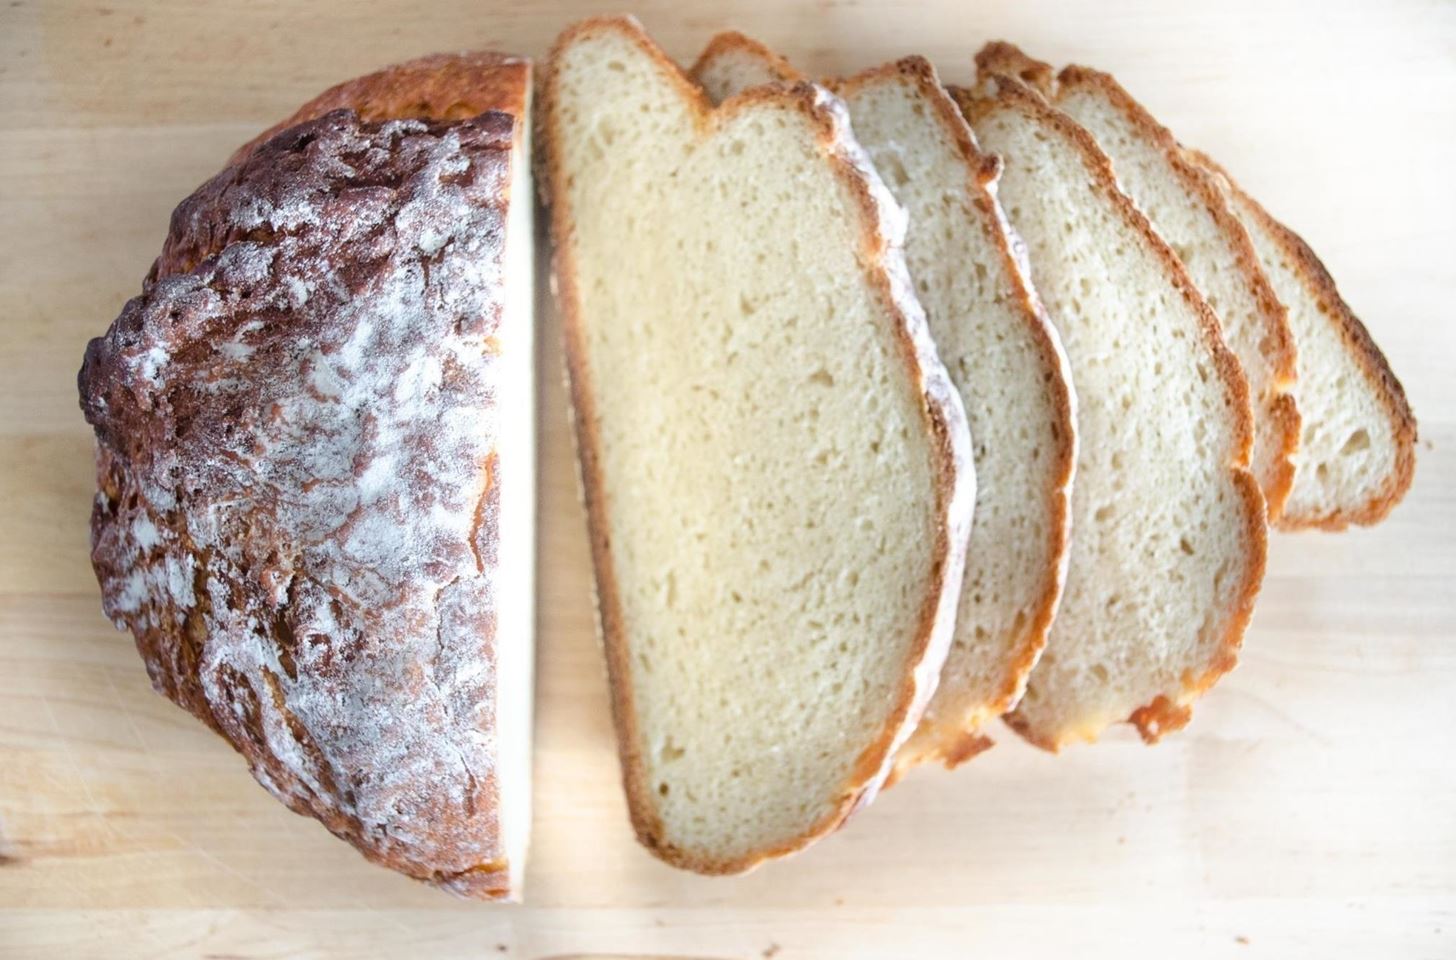 This Yogurt Trick Will Help You Get Professional-Tasting Sourdough Bread at Home